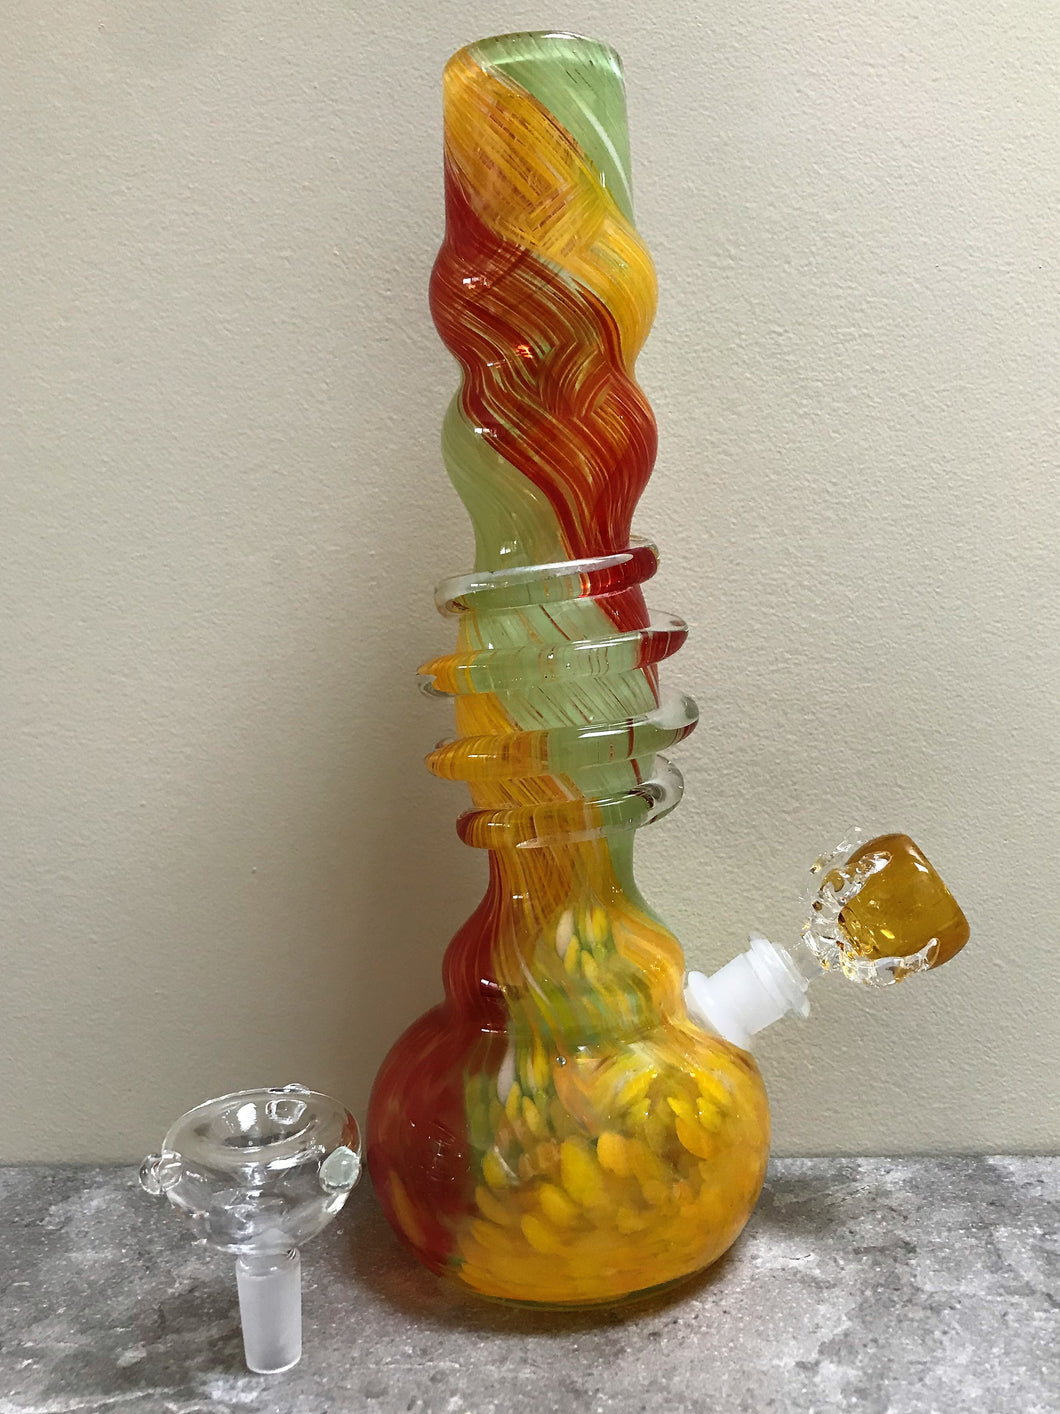 Thick 12” Soft Glass Bong with Claw Herb Bowl Slider - Multi Yellow Swirl